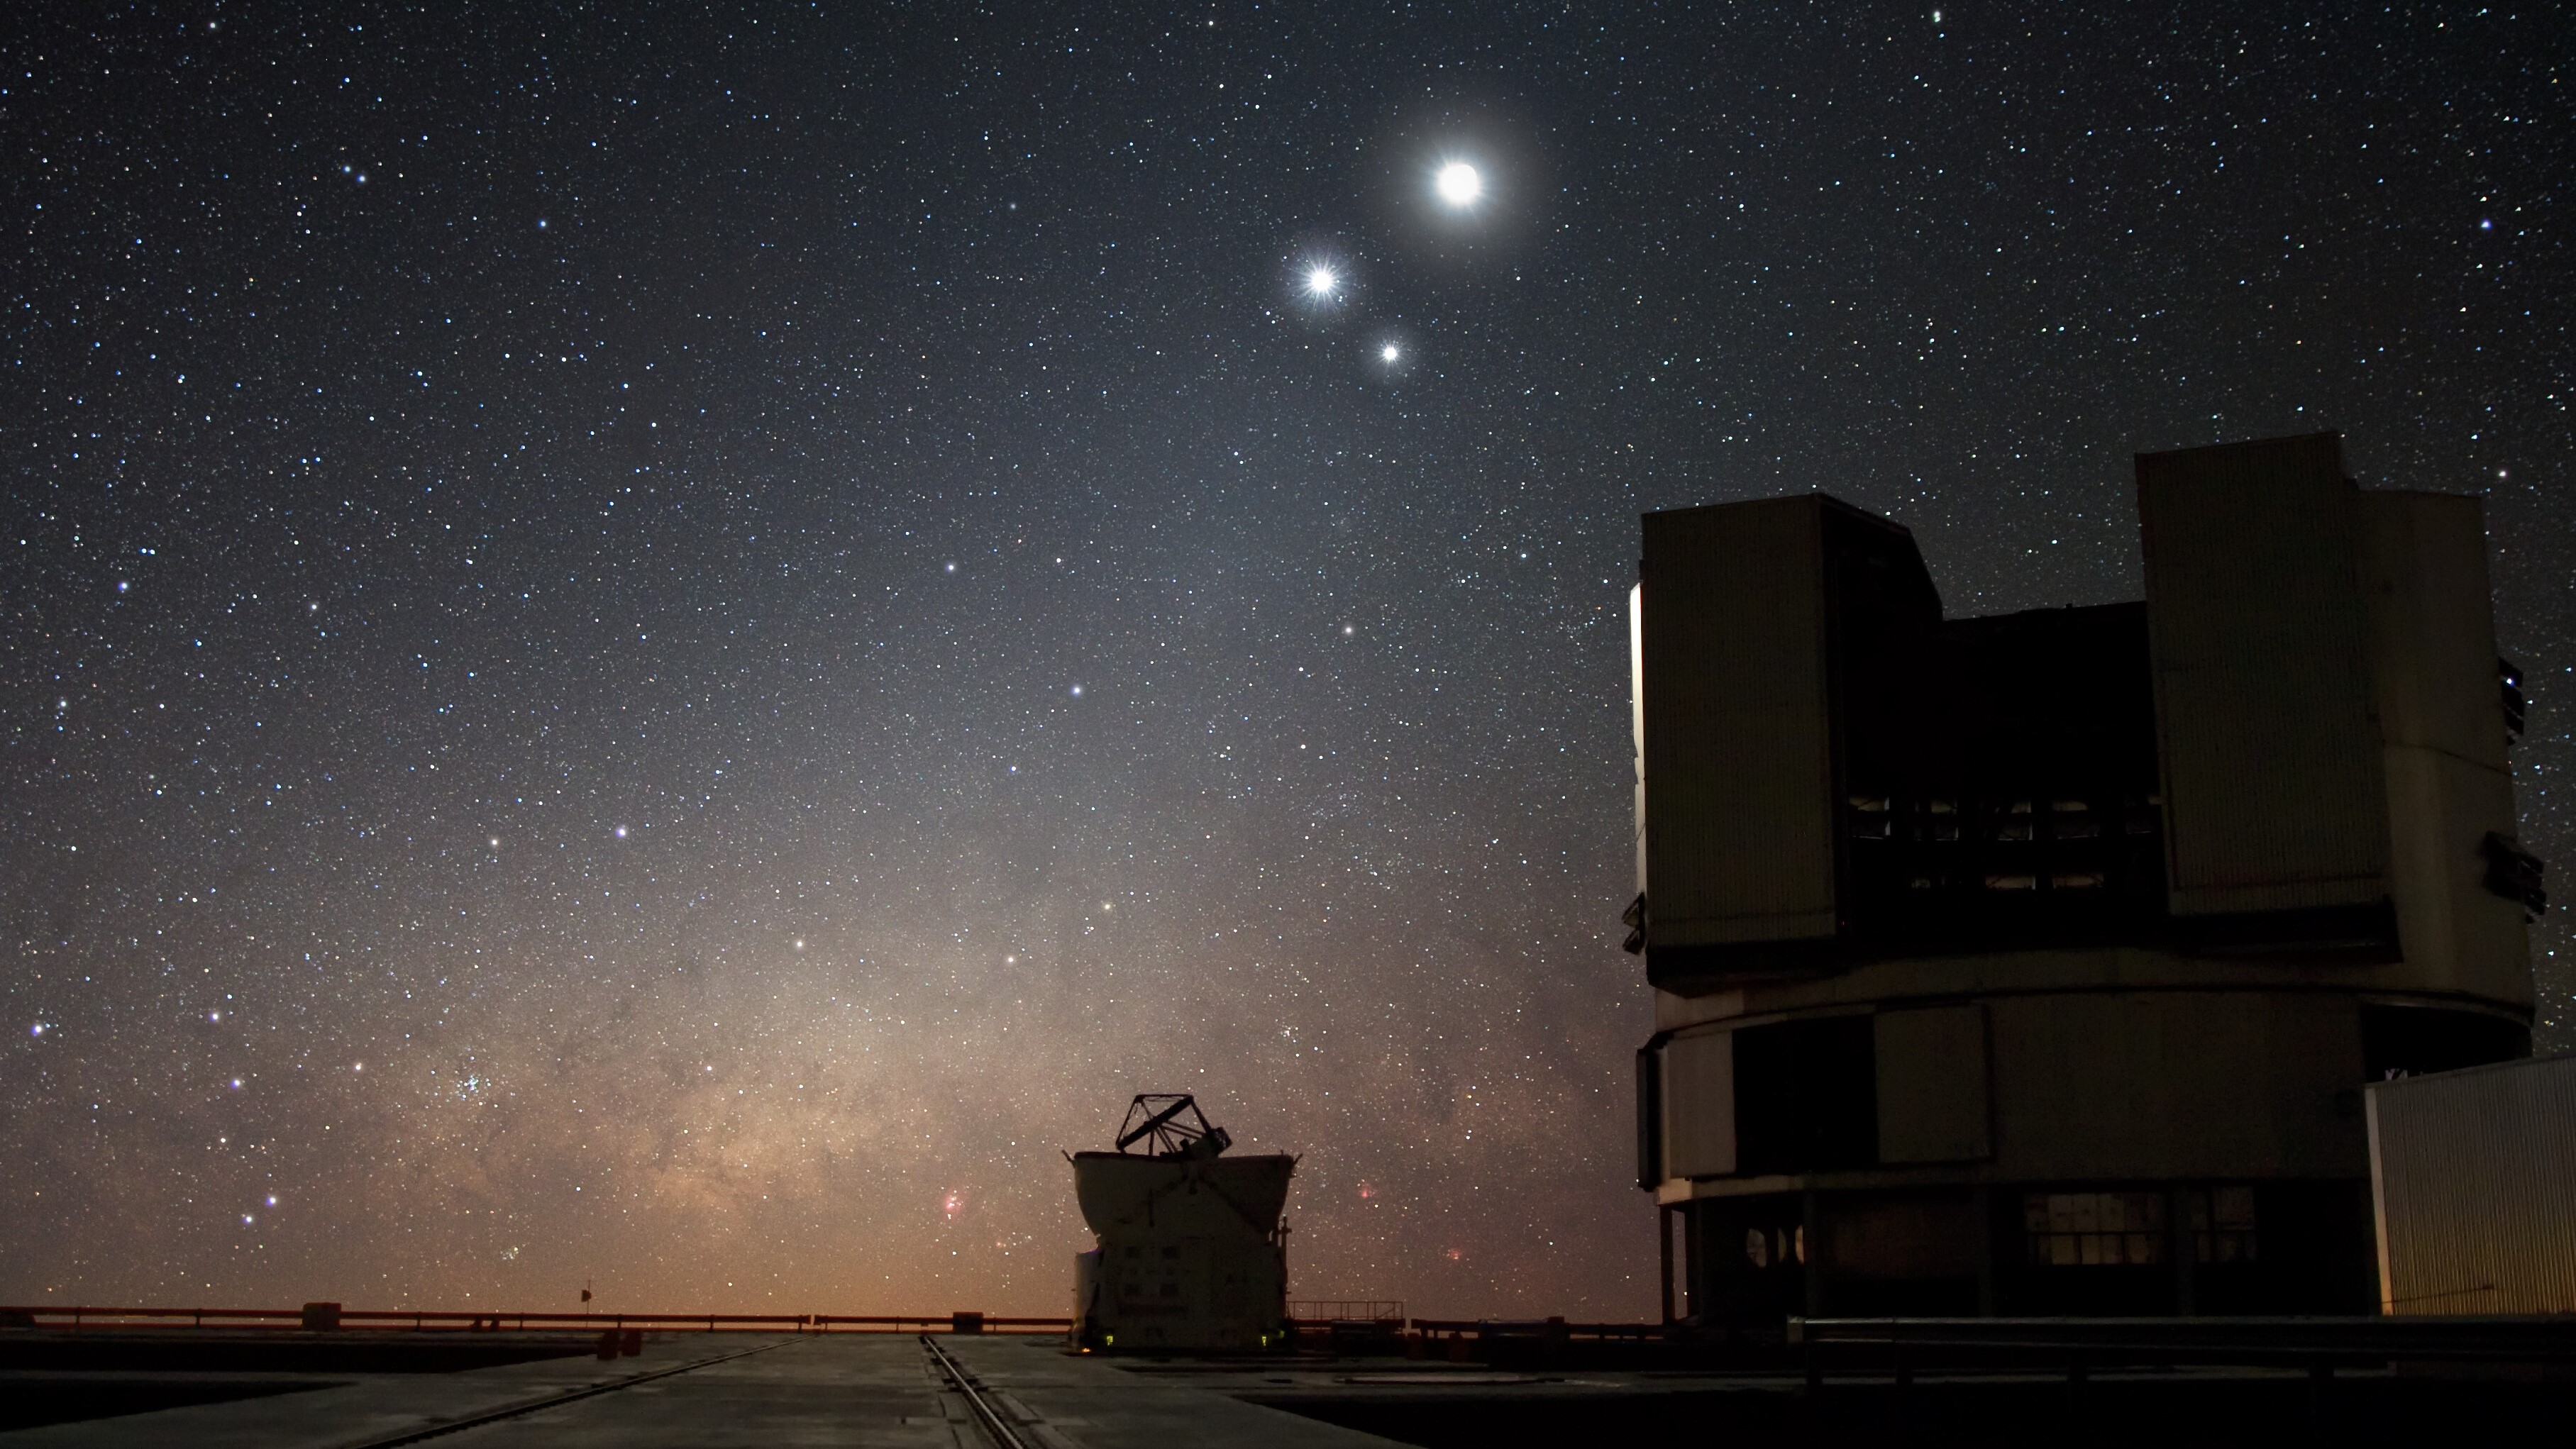 The Star of Bethlehem could have been the result of a conjunction whereby two or more celestial bodies appear to meet in the sky. Above is an image captured at ESO's Very Large Telescope observatory at Paranal, showing a conjunction. Here, the moon is joined by Venus (center of the image) and Jupiter (to the right of Venus).